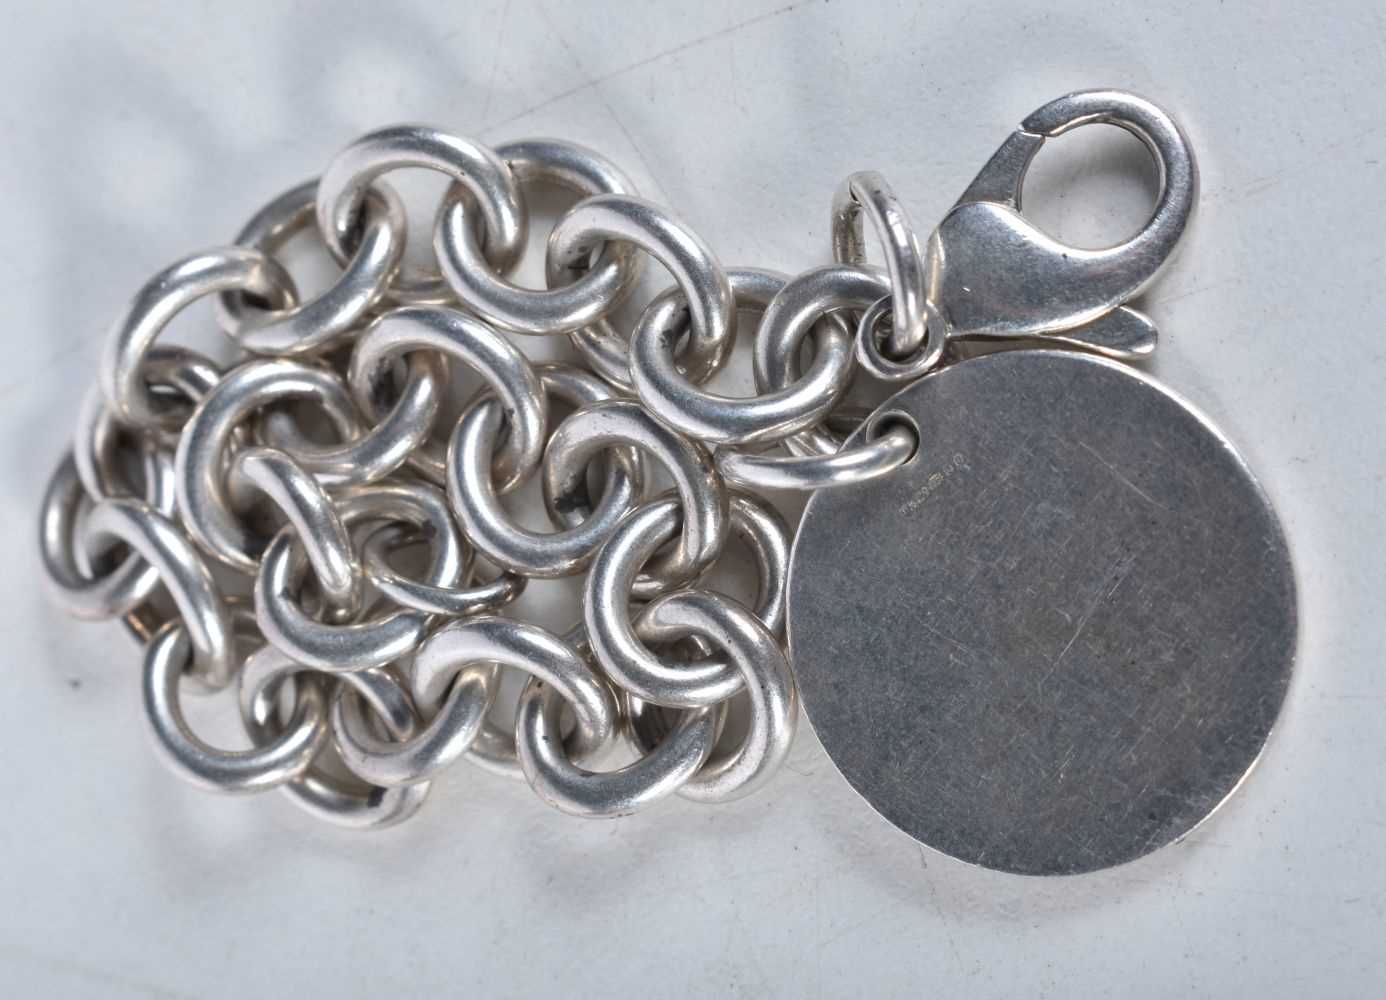 Silver bracelet with heart tag by designer Tiffany & Co. Stamped Tiffany 925. 18cm long, weight 35g - Image 3 of 3